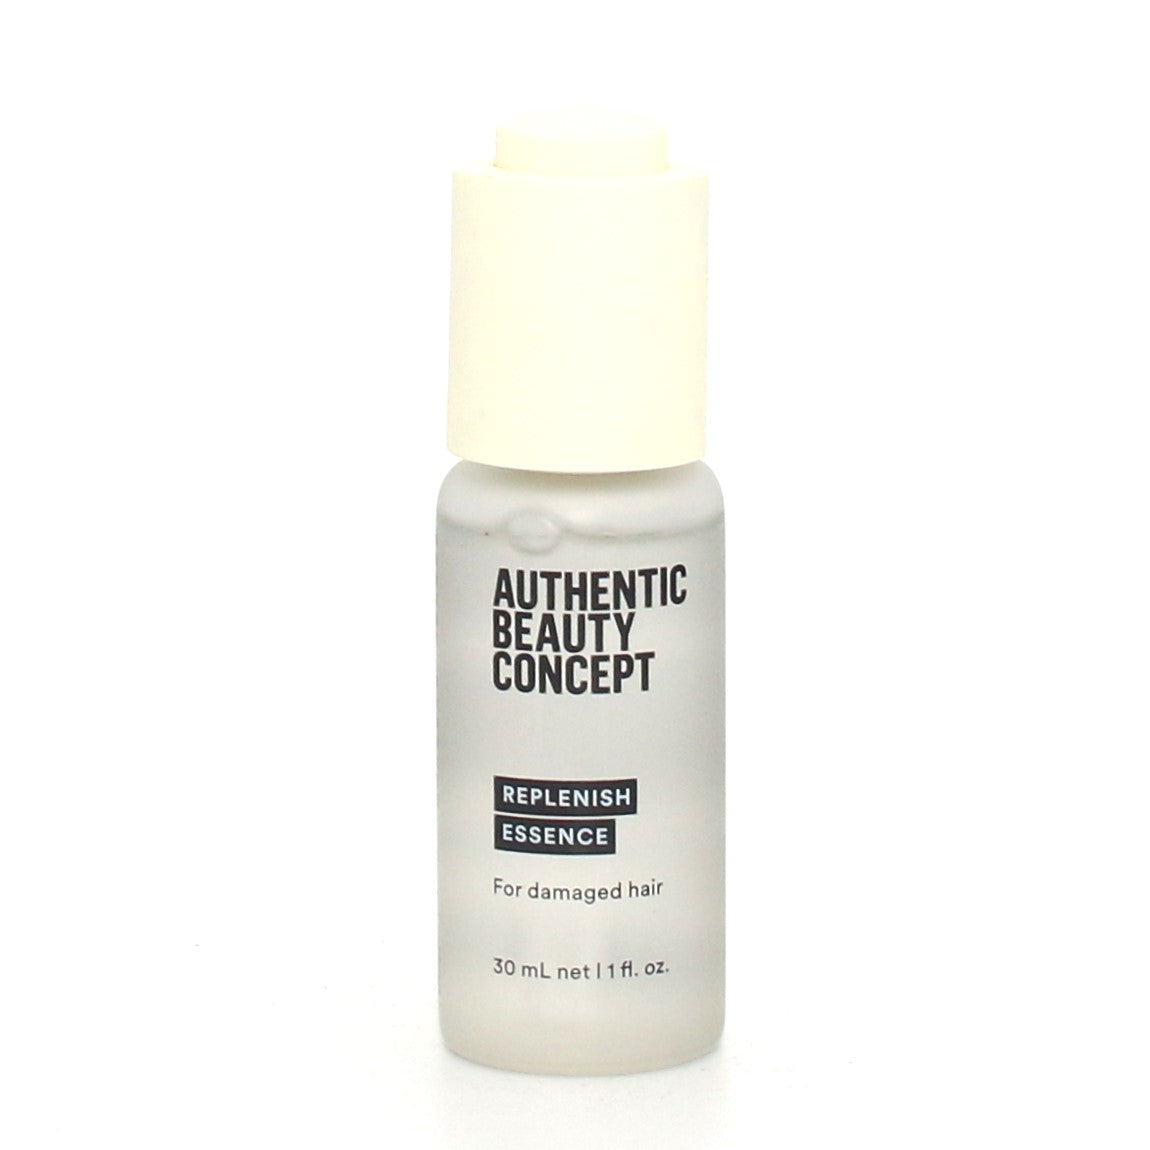 Authentic Beauty Concept Replenish Essence for Damaged Hair 1 oz